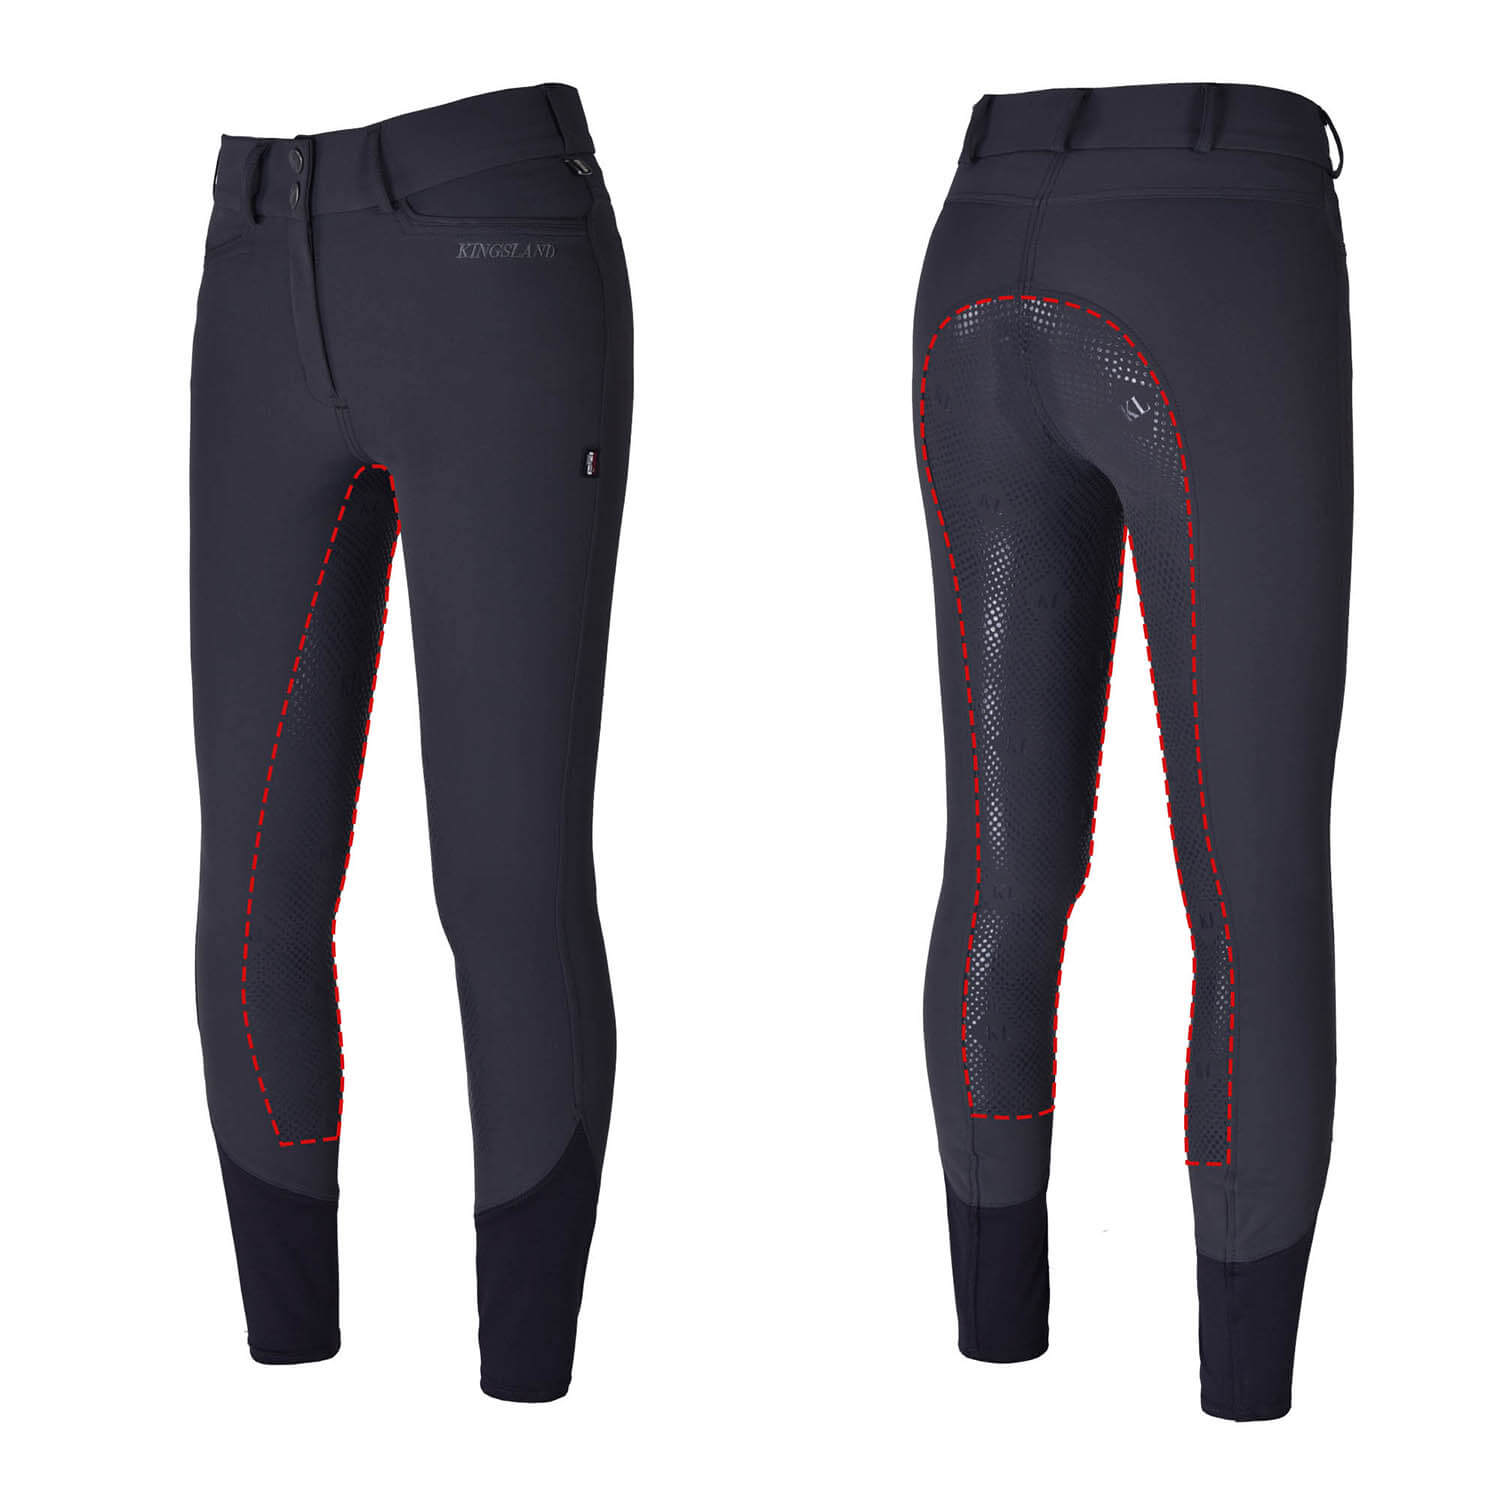 Kingsland Classic breeches with silicone grip